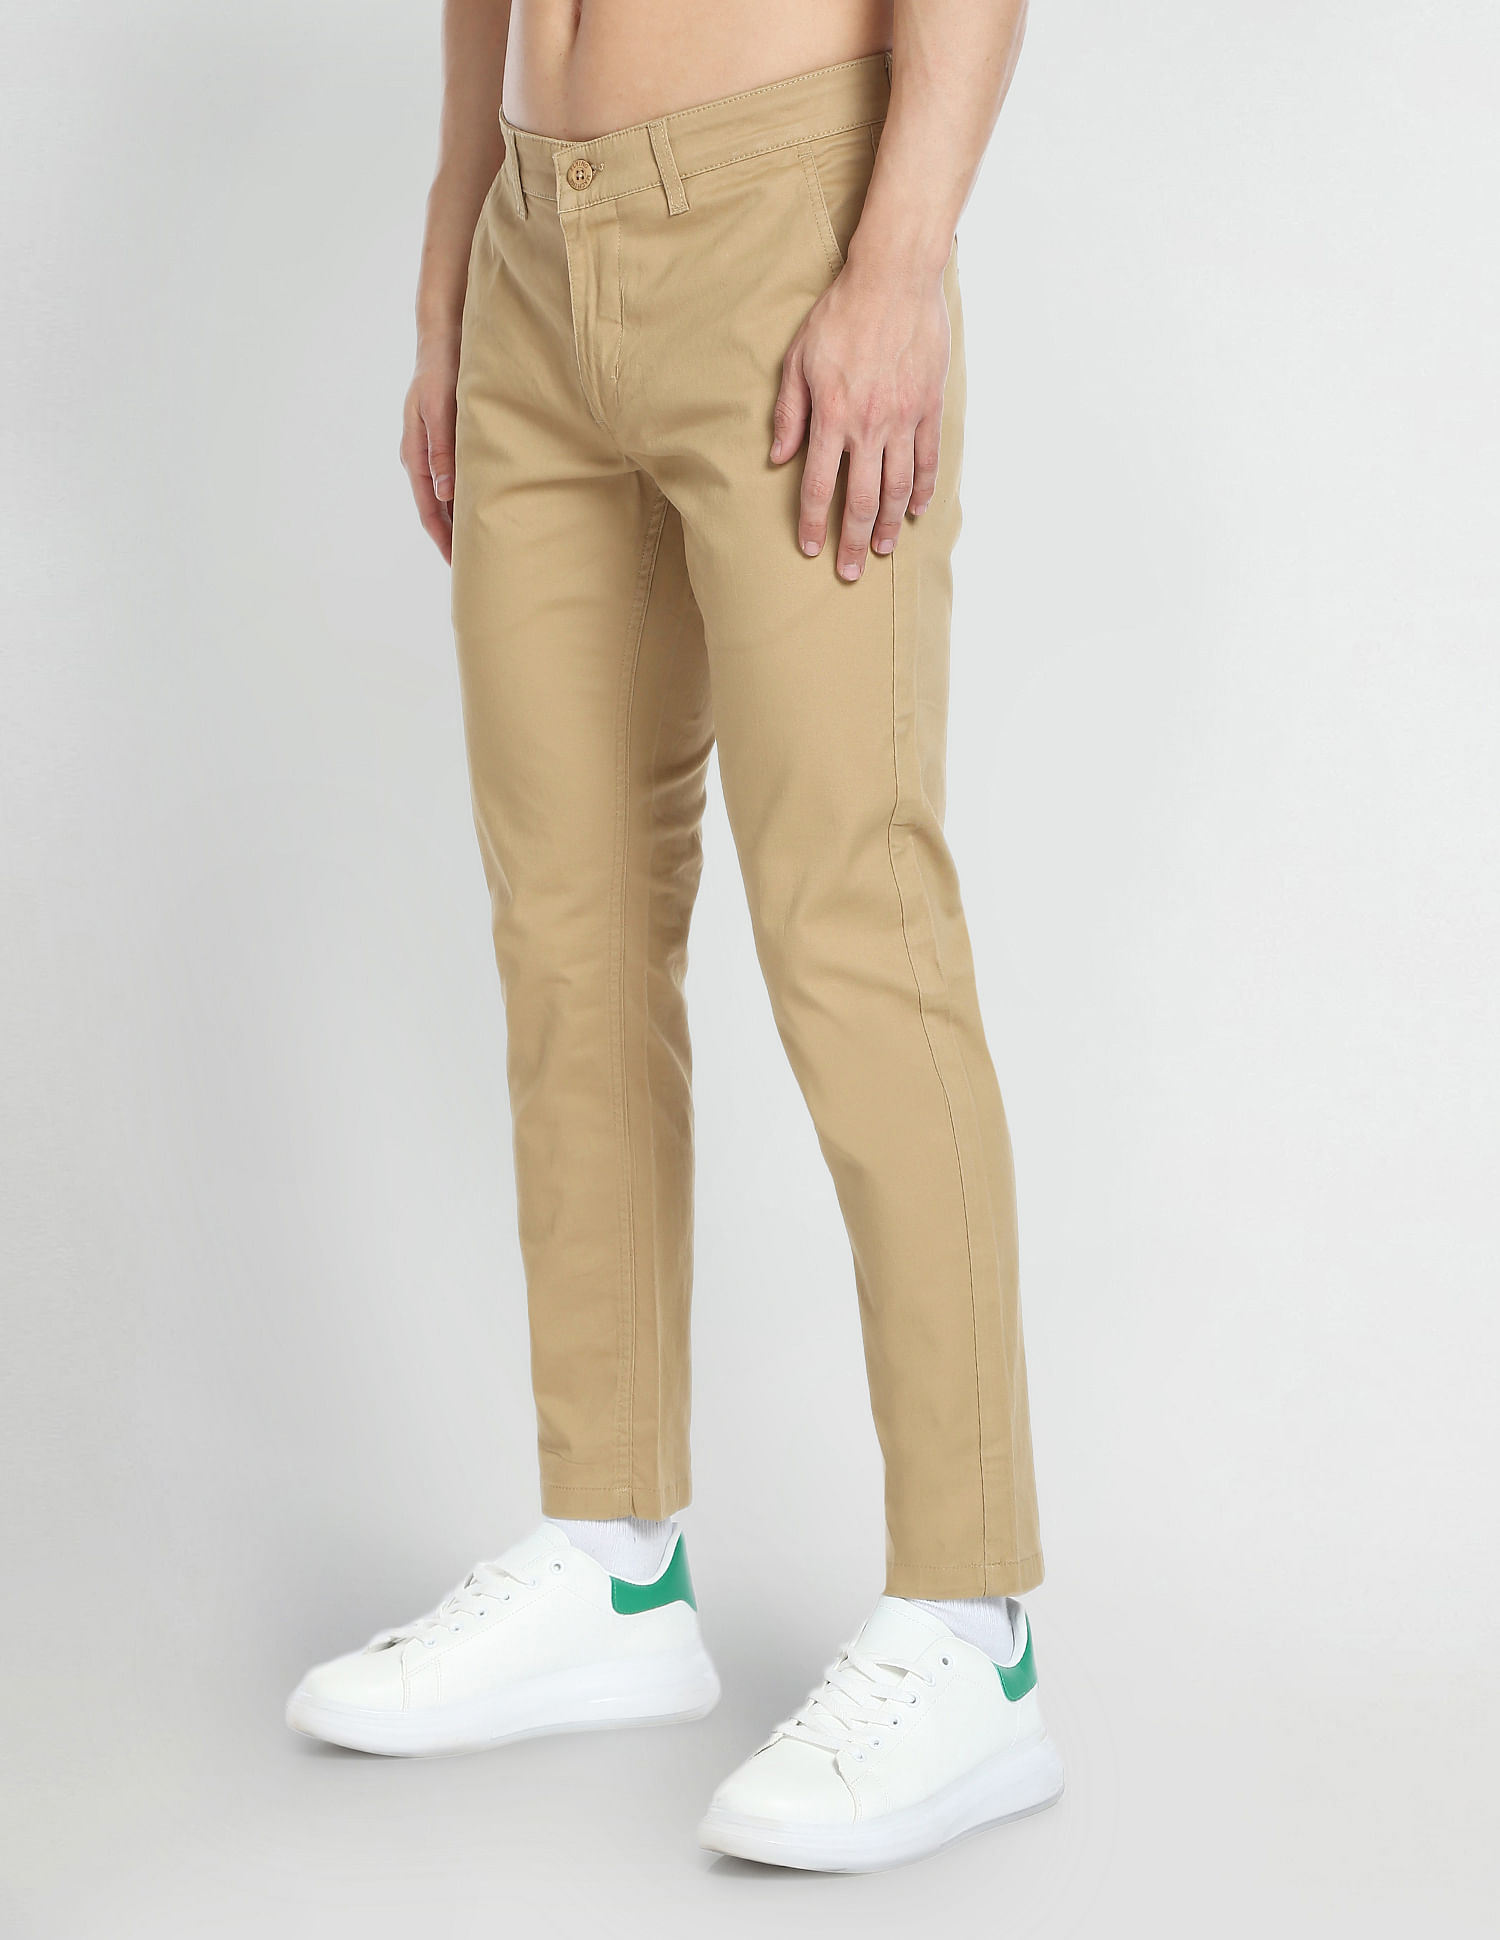 O'Connell's Khakis - Plain front Cotton Twill Trousers - British Tan -  Men's Clothing, Traditional Natural shouldered clothing, preppy apparel